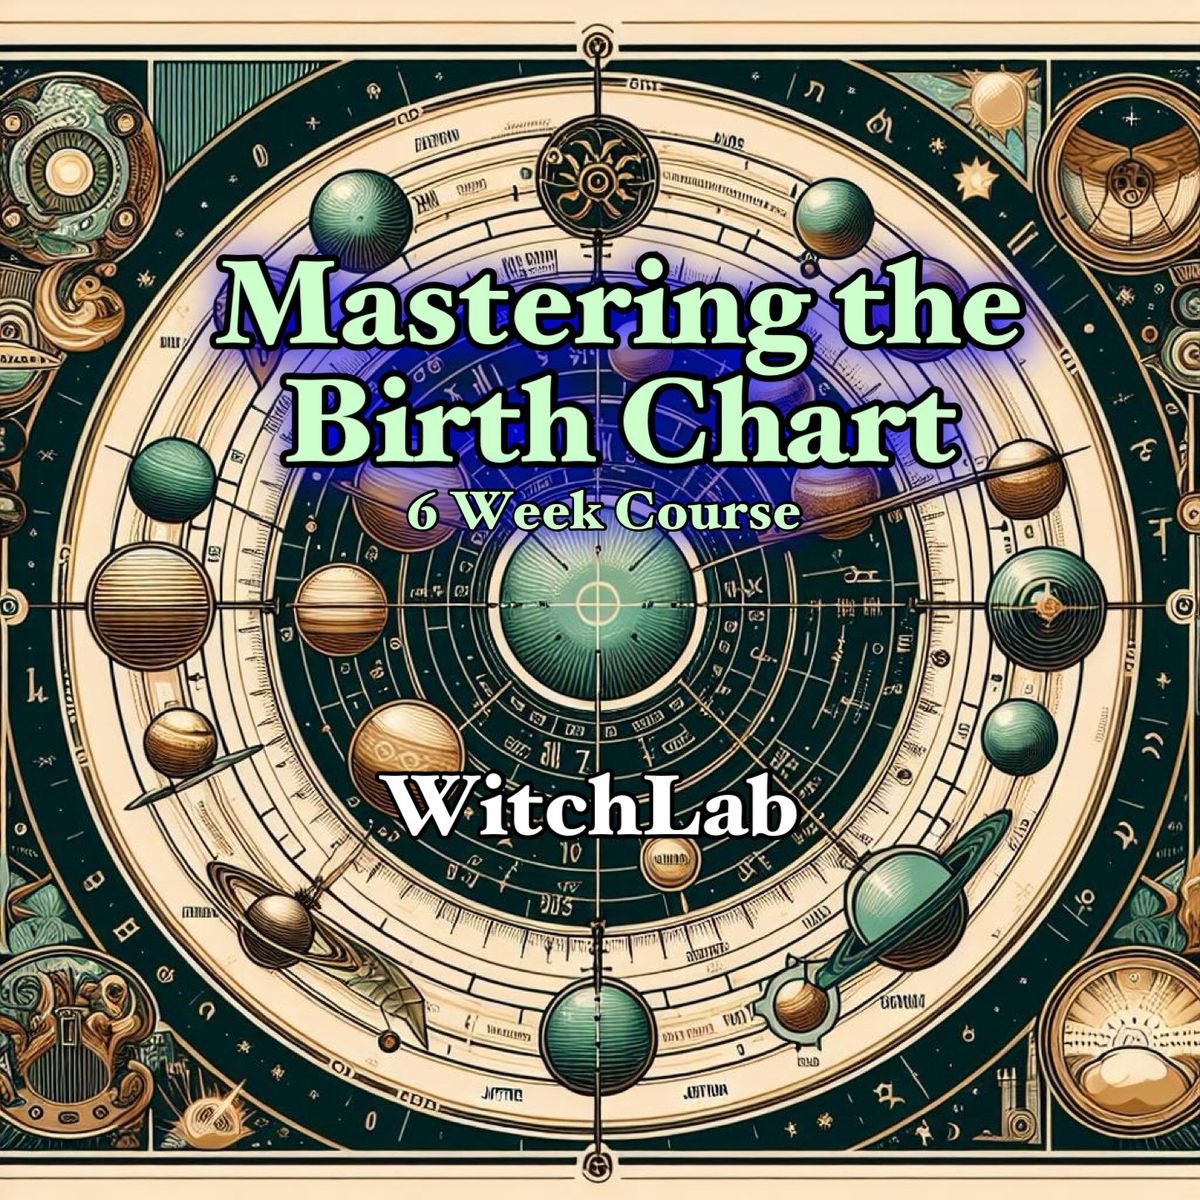 Mastering the Birth Chart - 6 Week Course